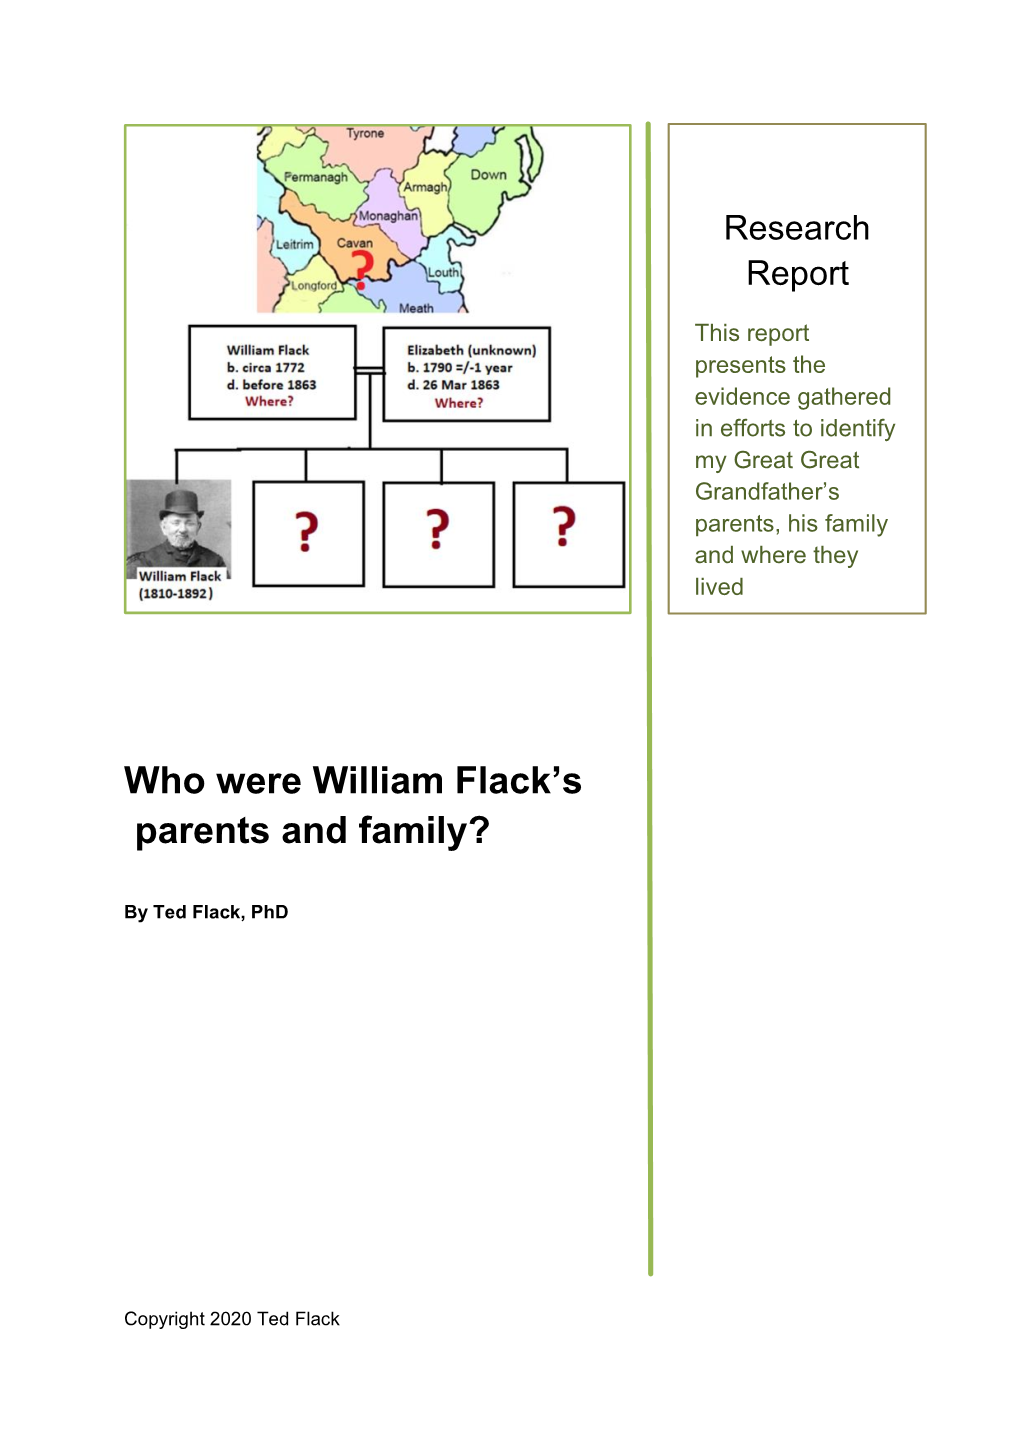 Who Were William Flack's Parents and Family?